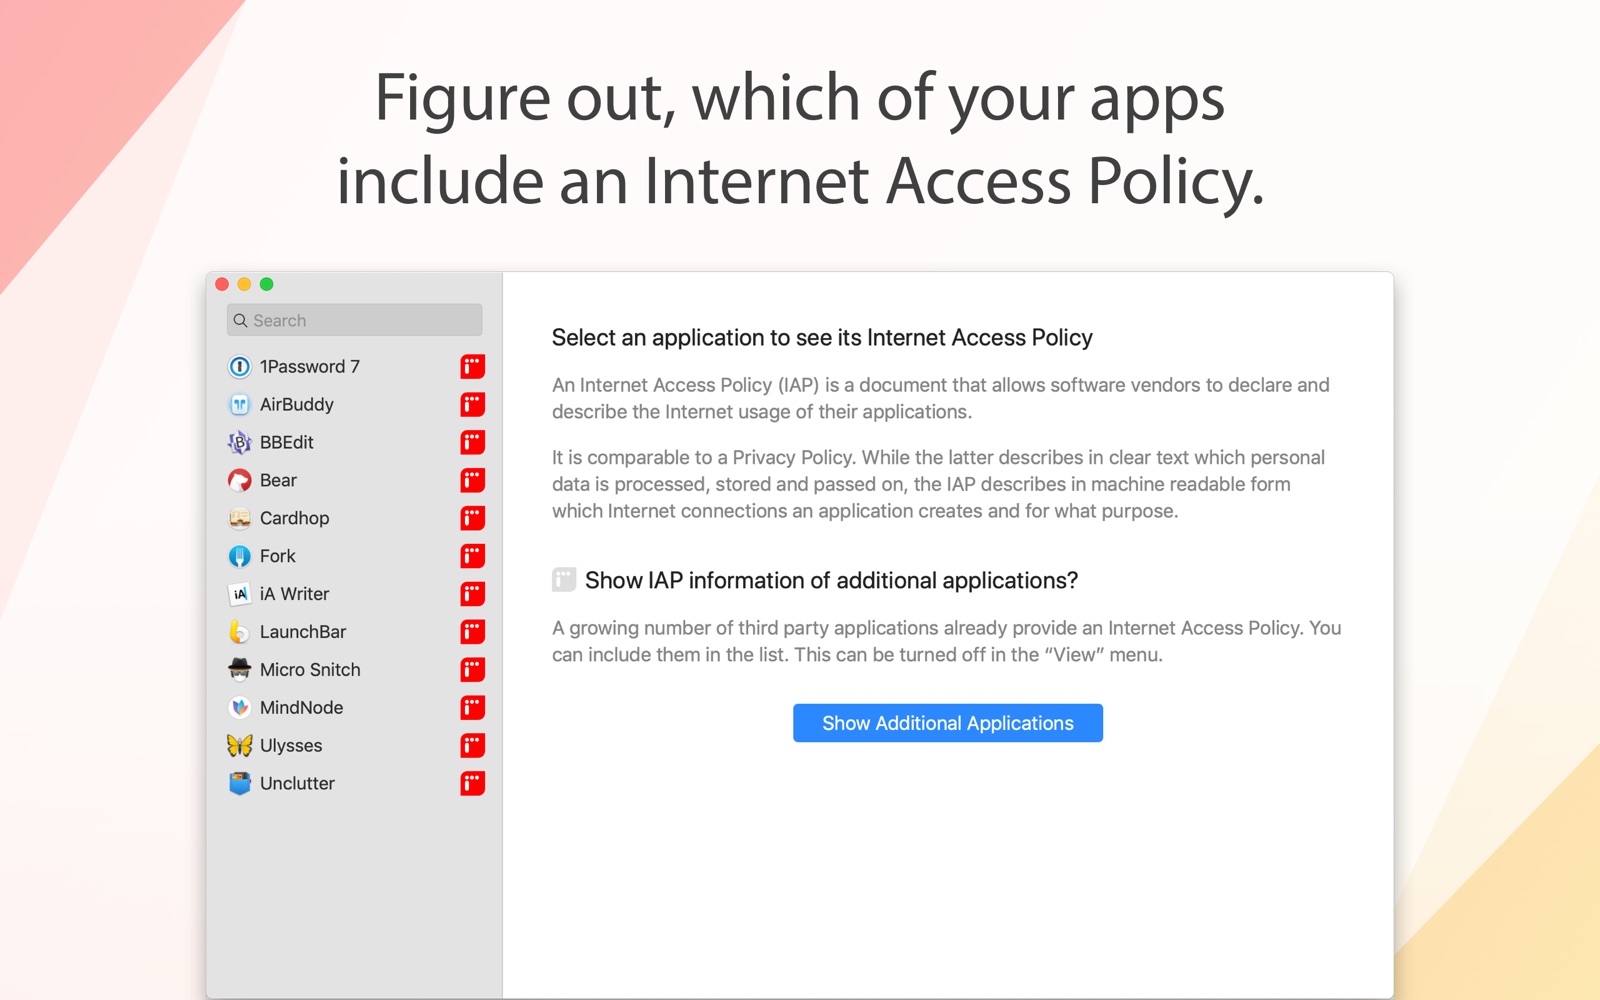 Internet Access Policy Viewer 1.0 : Main Window